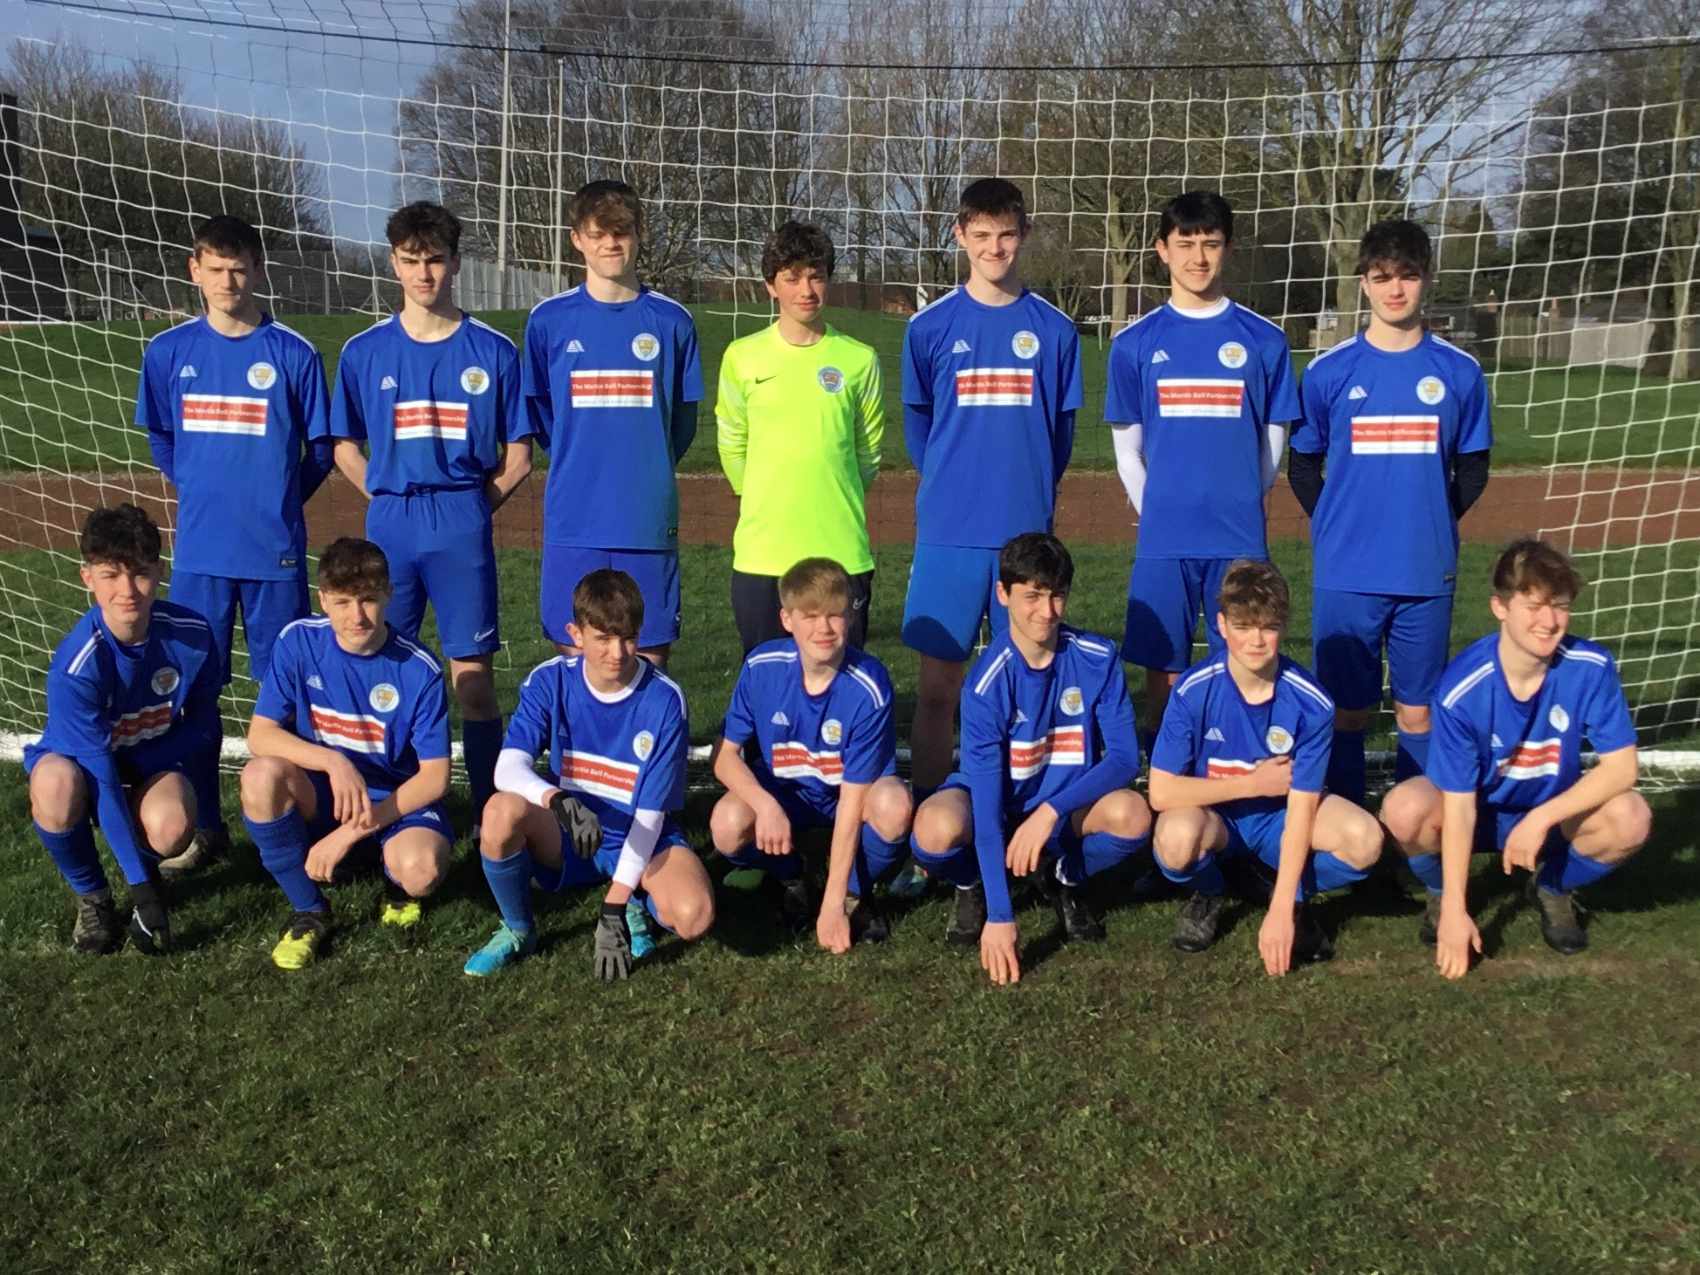 oroughbridge Juniors FC Under 16s wearing their new kit sponsored by The Martin Bell Partnership